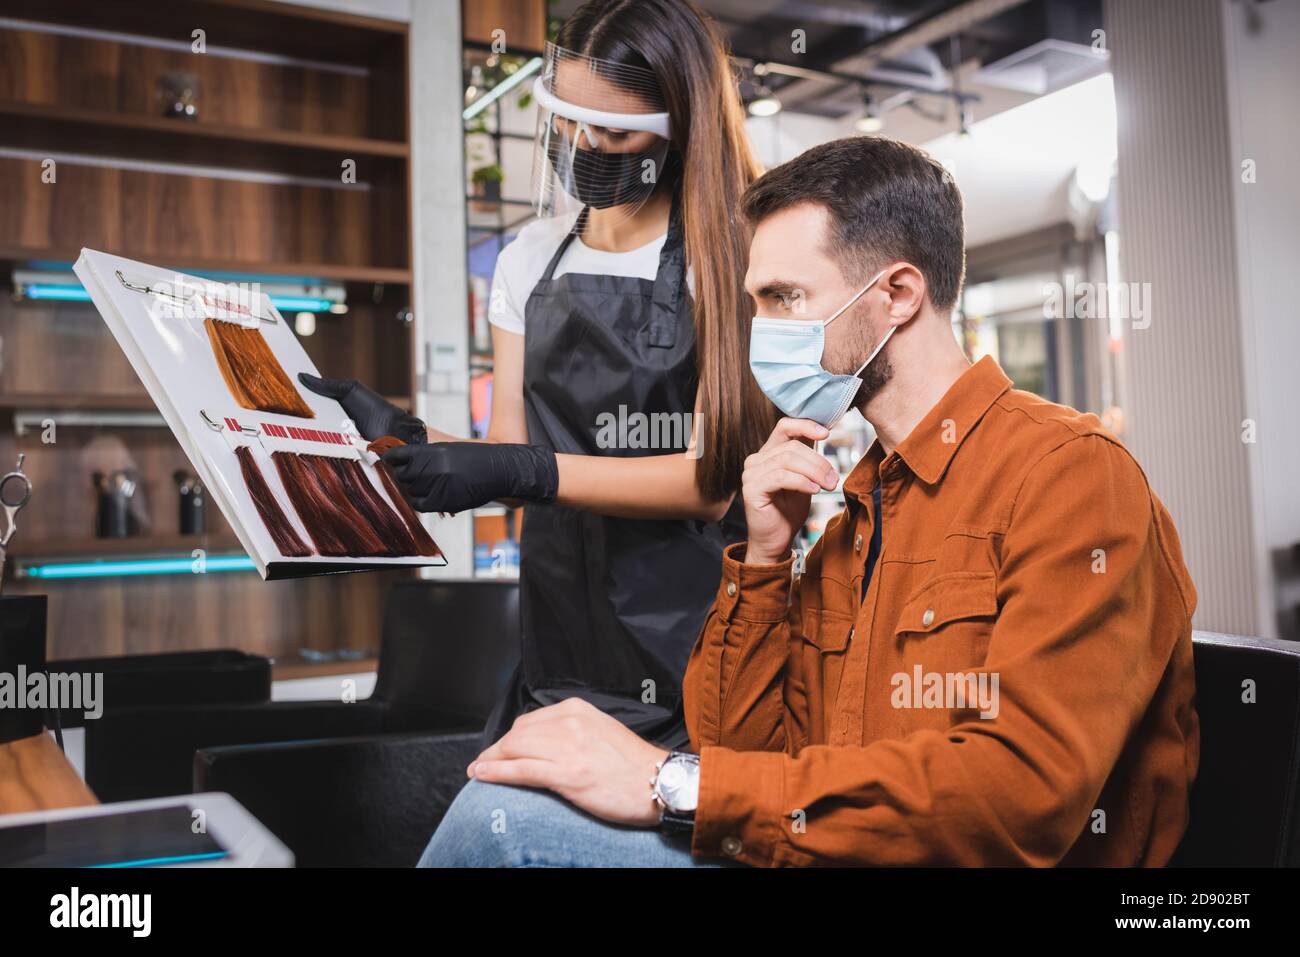 hairstylist in face shield and apron showing hair colors palette to man in medical mask Stock Photo